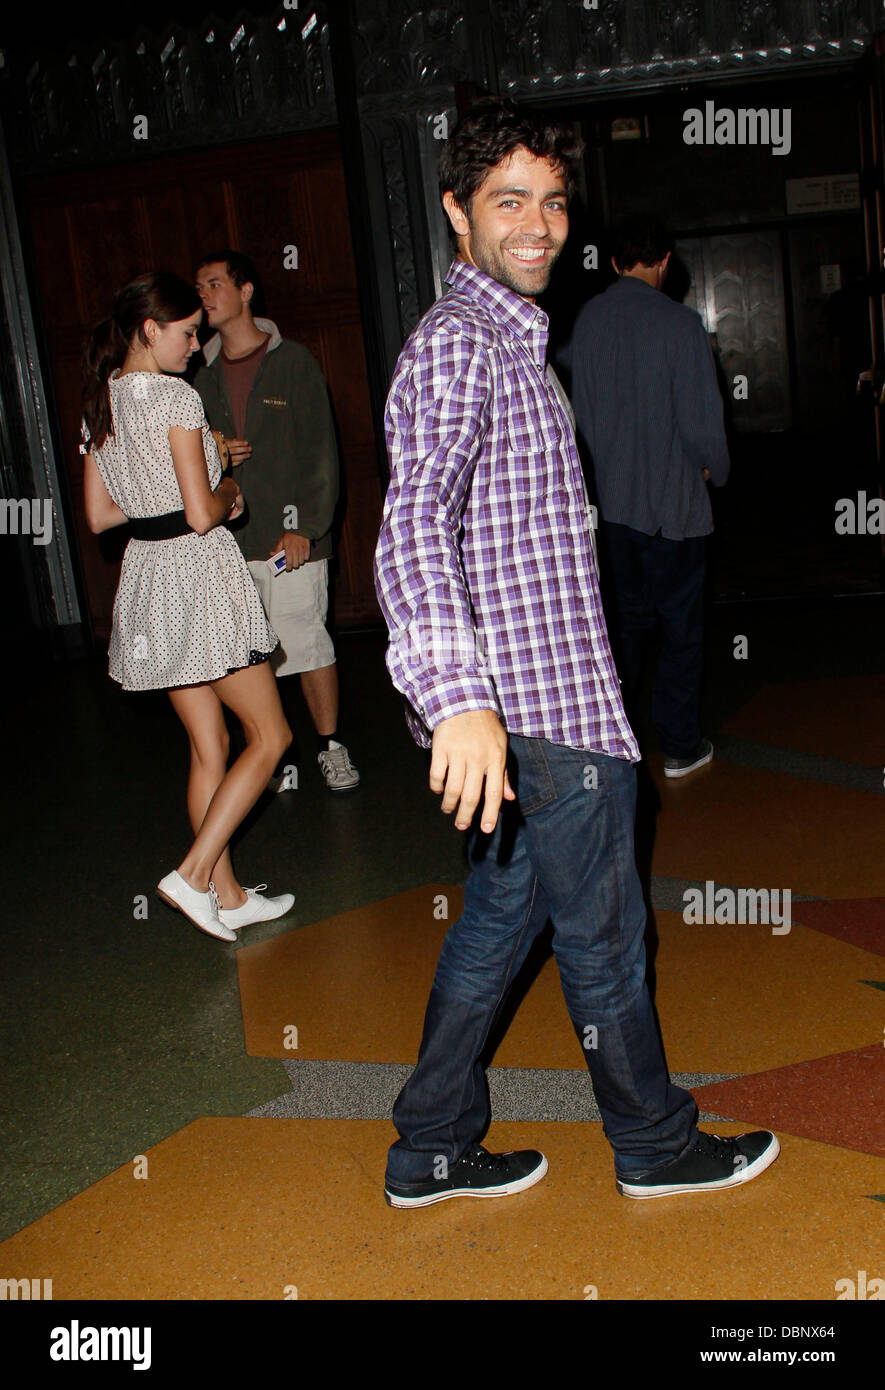 Adrian Grenier arrives at a Deerhunter concert with a female companion   Los Angeles, California - 09.08.11 Stock Photo